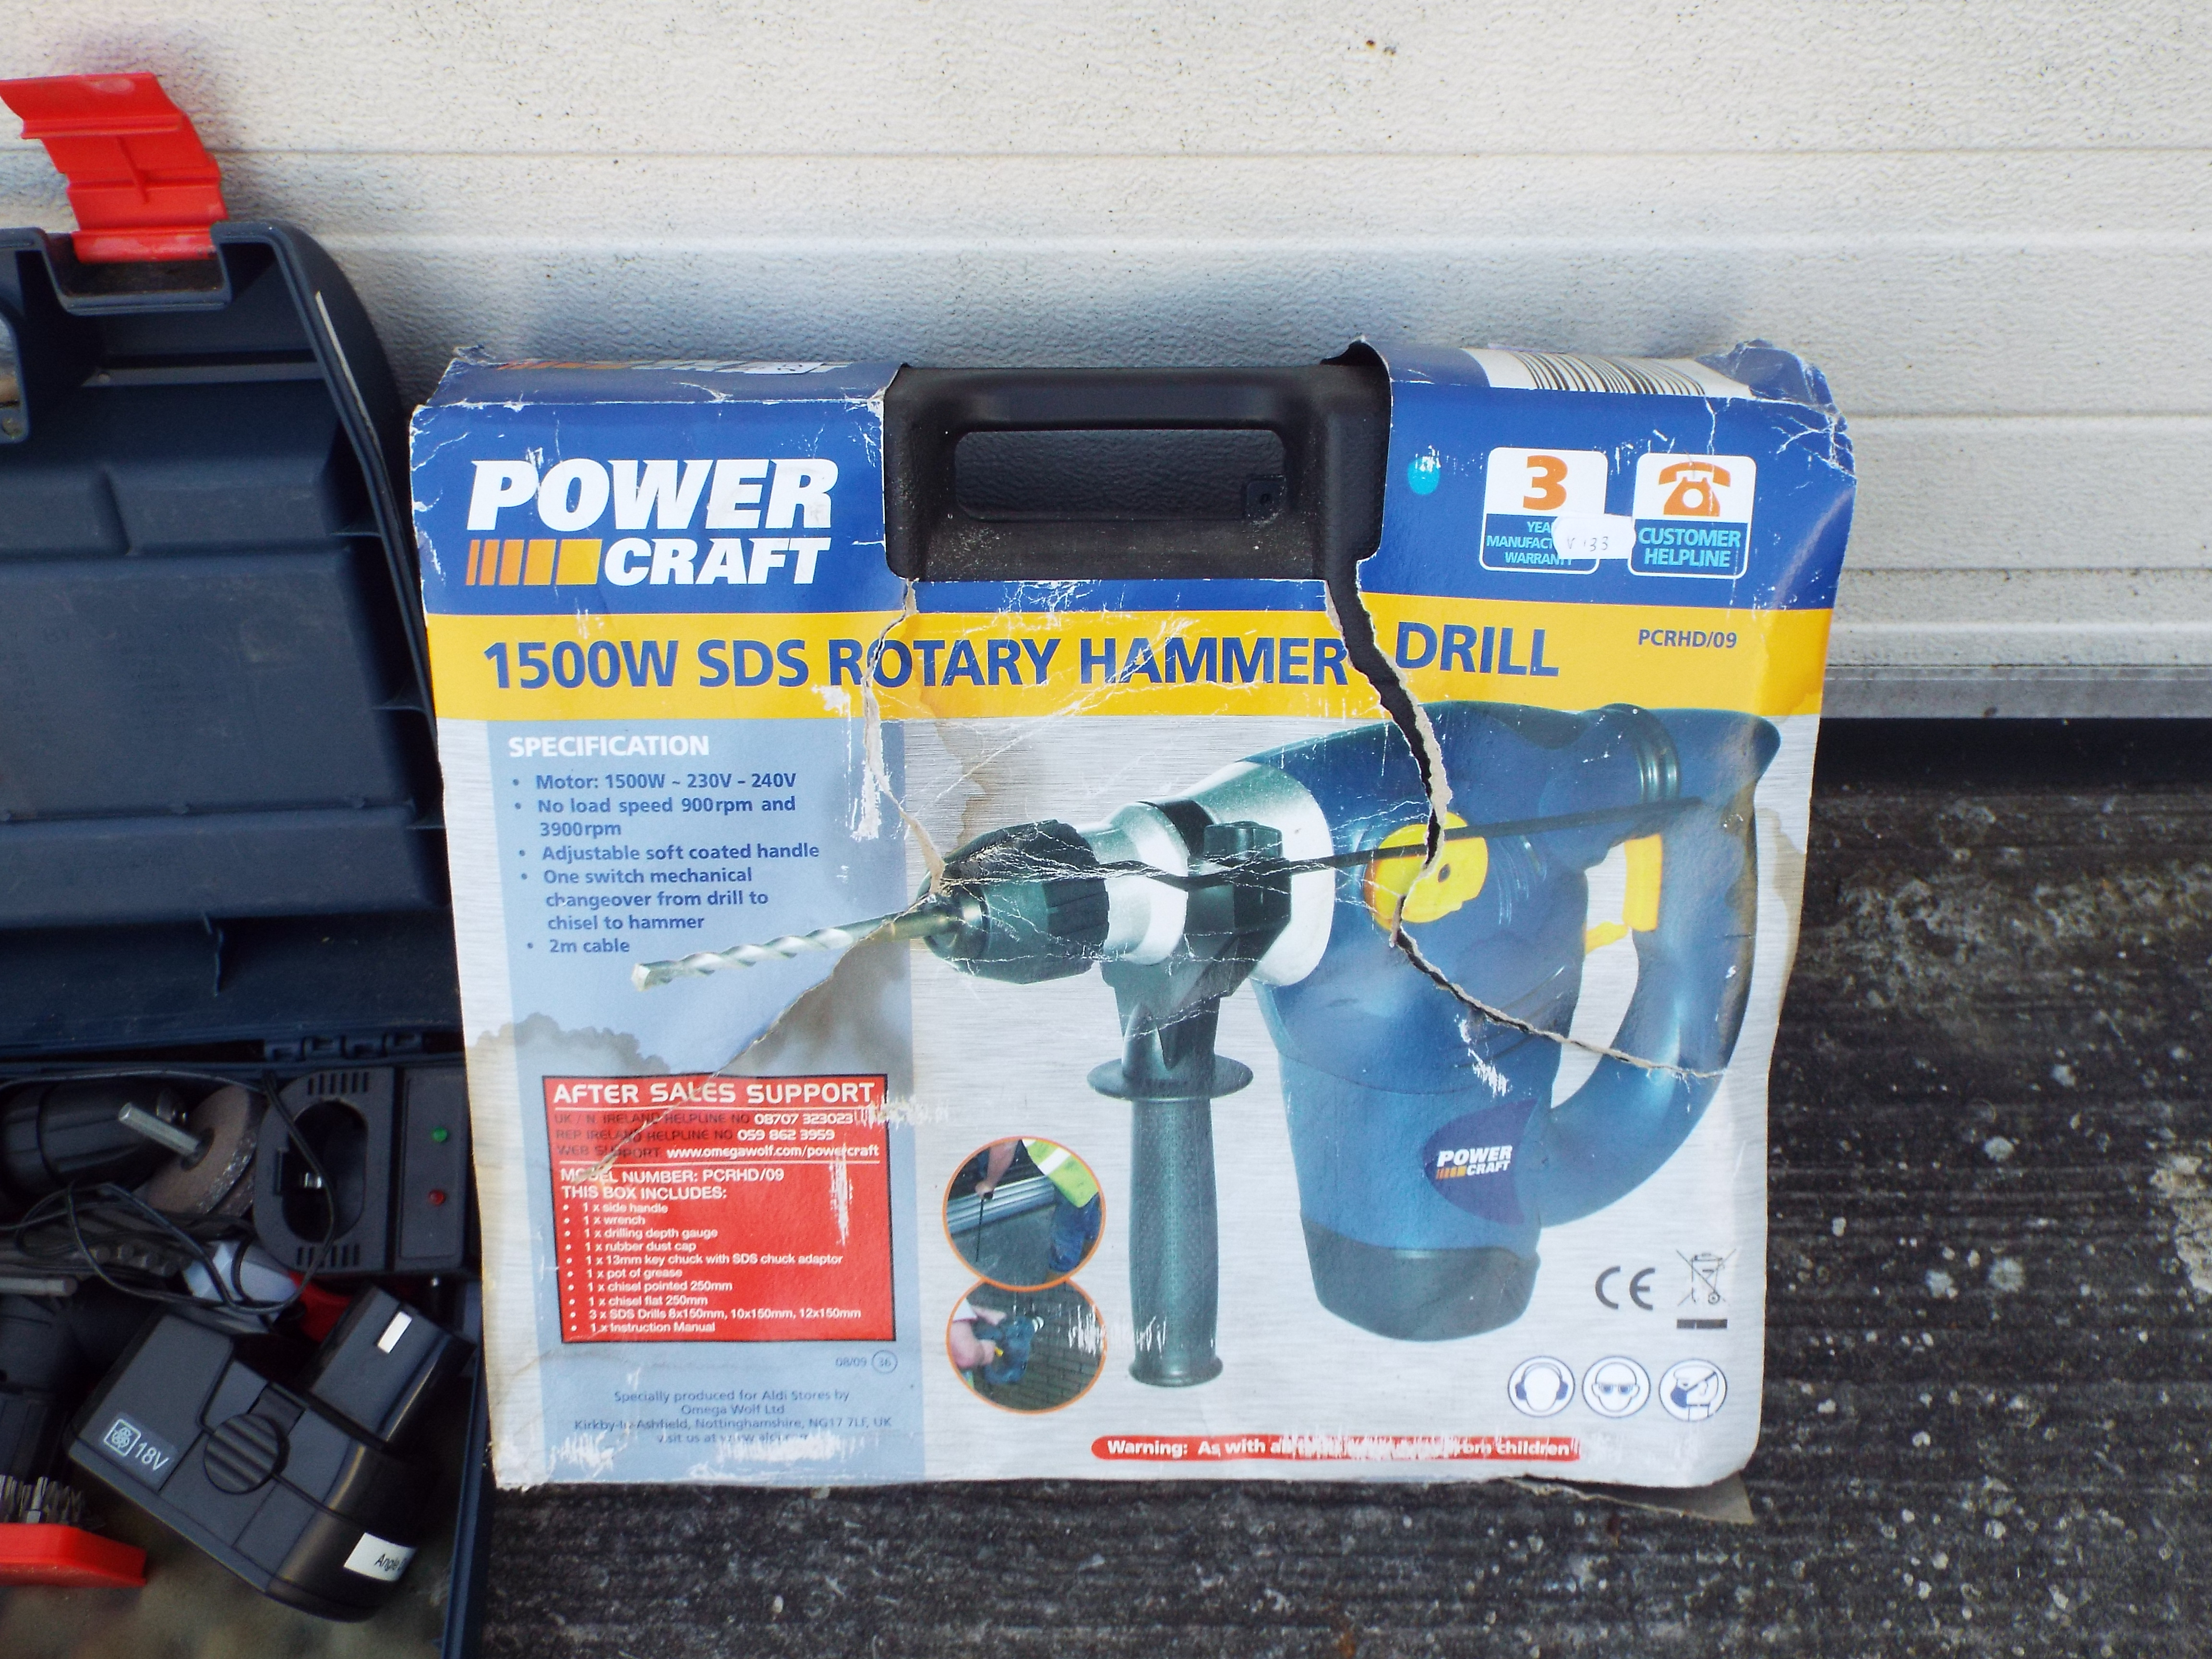 A Power Craft 1500w SDS Rotary Hammer Drill with accessories, cased, - Image 3 of 3